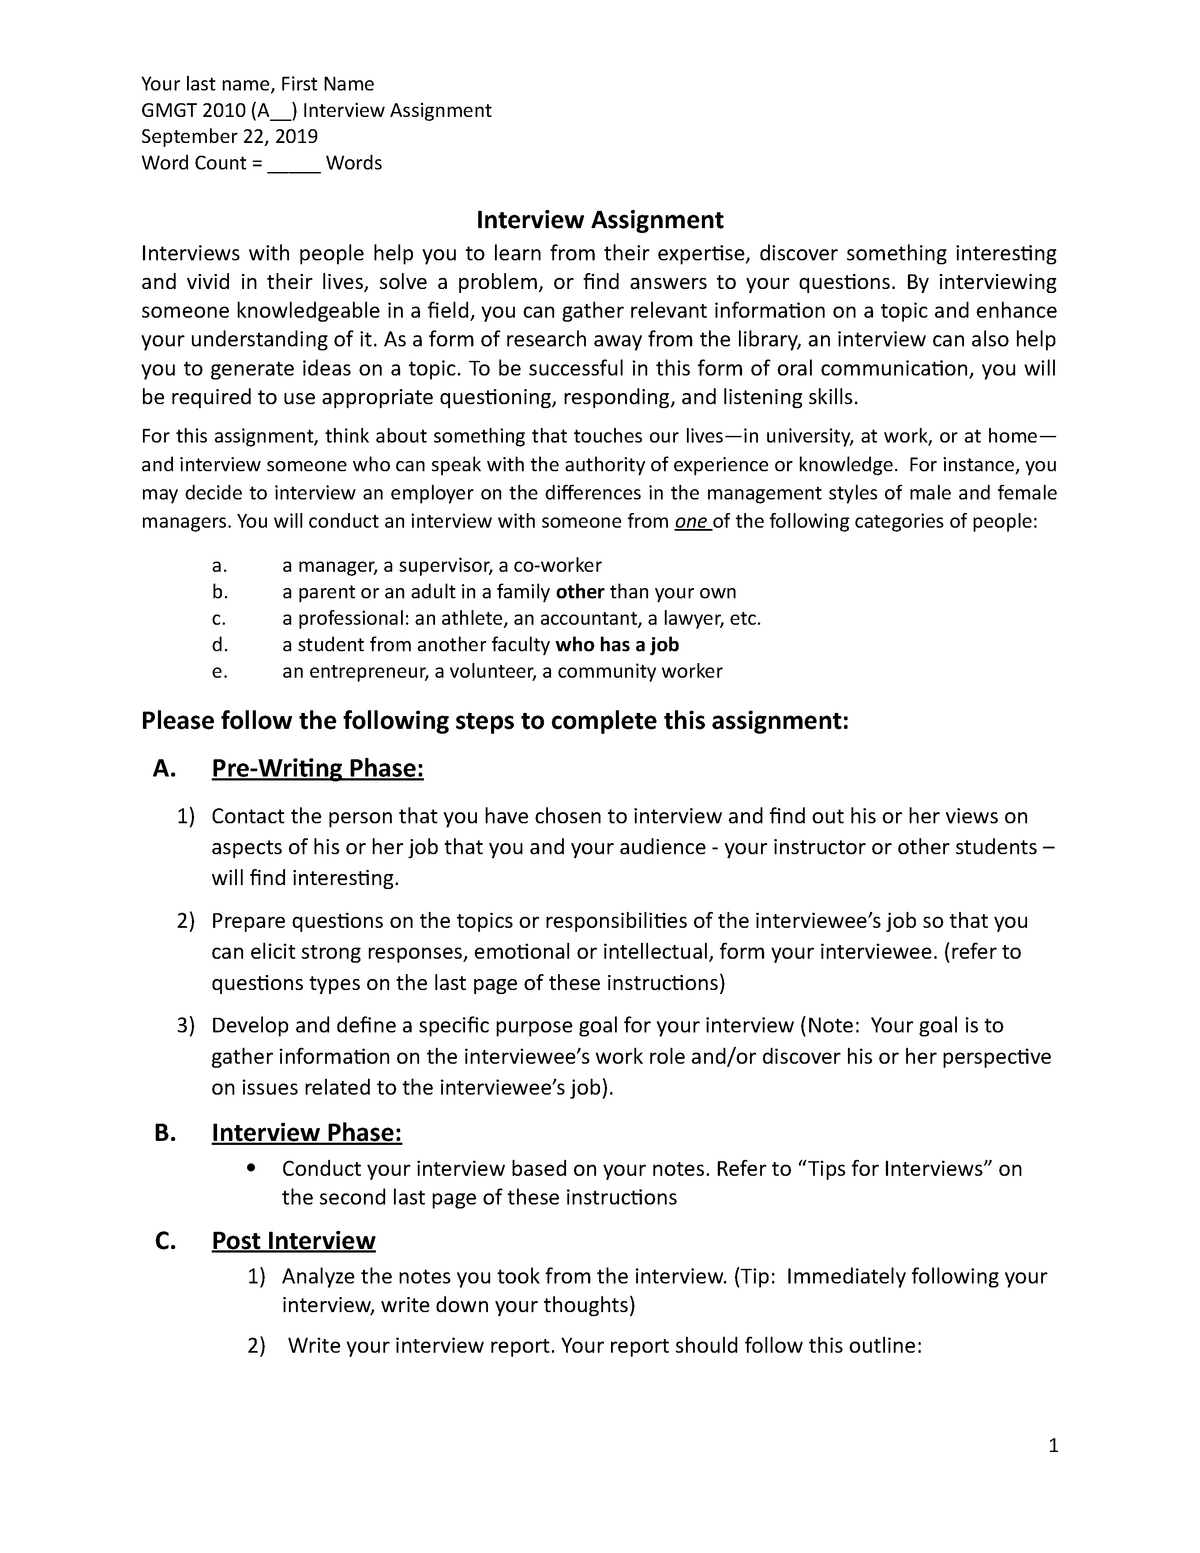 writing assignment interview